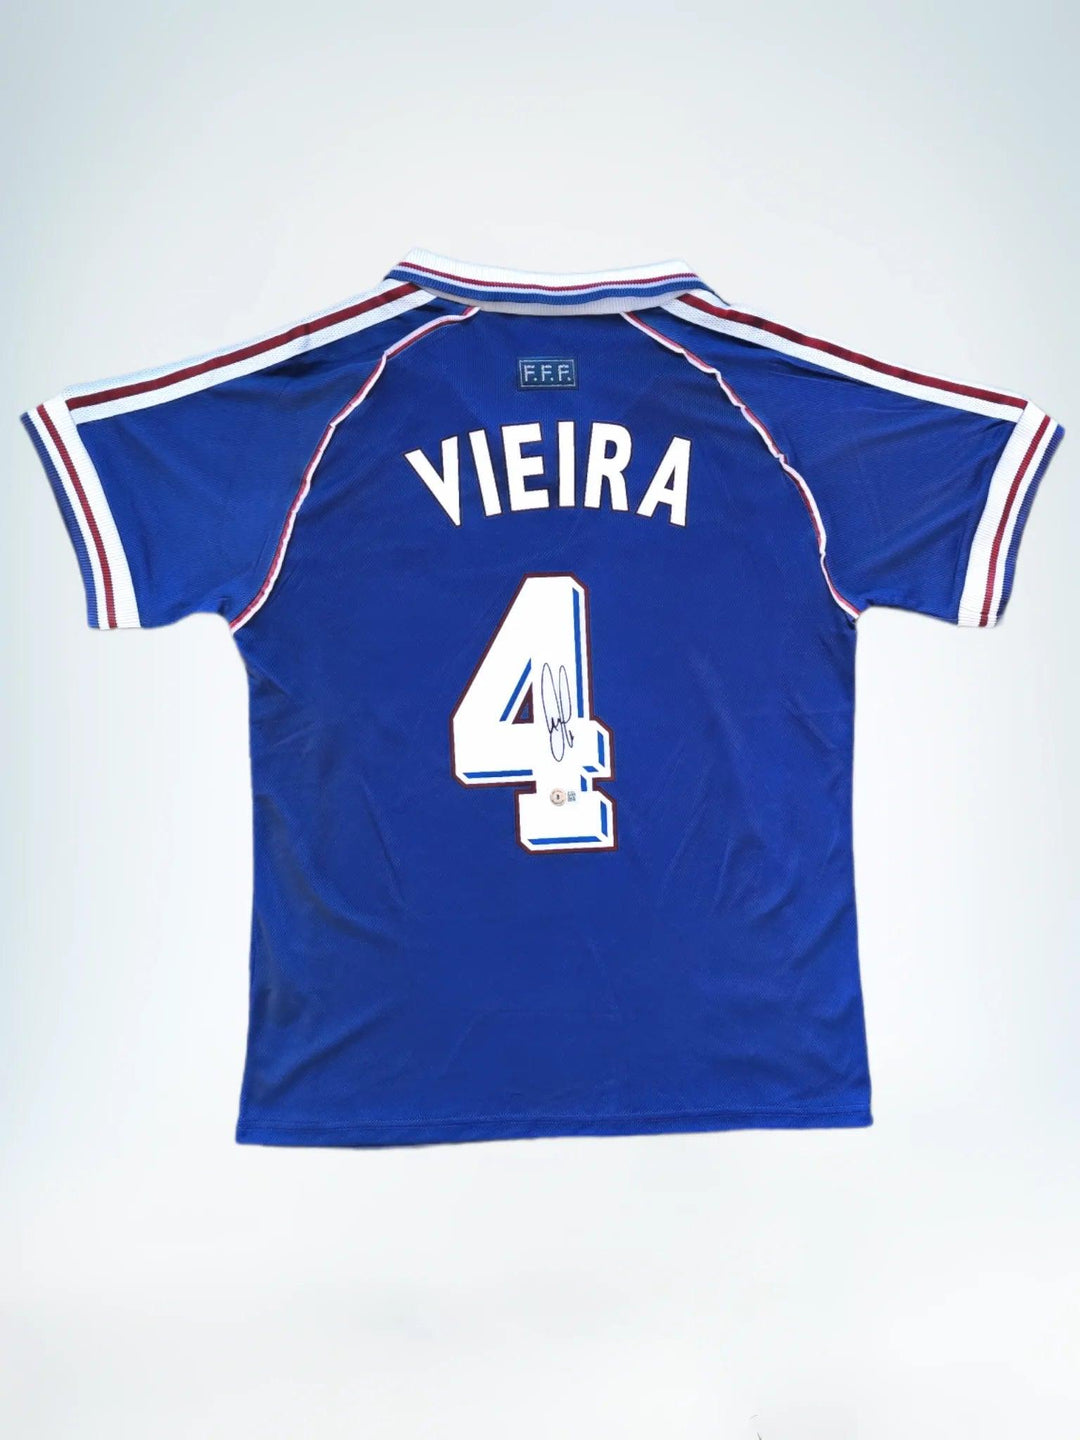 Patrick Vieira 4 France 1998 World Cup Home - Signed Soccer Shirt | Iconic Les Bleus Champion